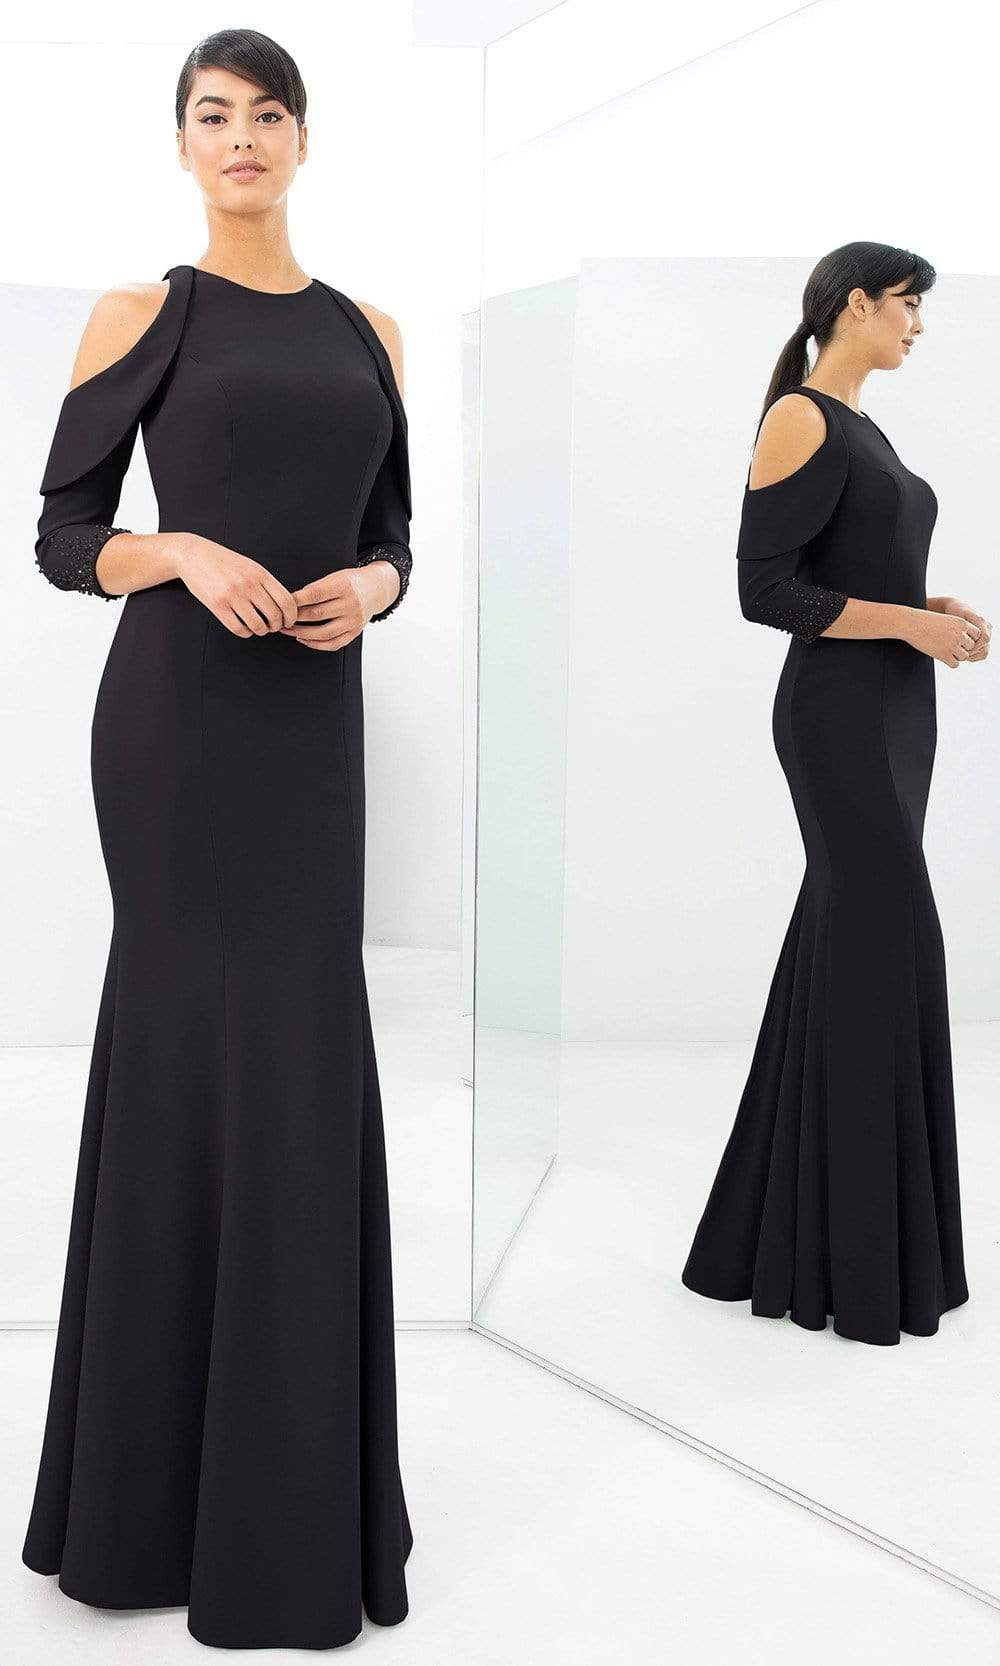 Alexander By Daymor - 1351 Fitted Mermaid Gown With Cold Shoulders Mother of the Bride Dresses 00 / Black